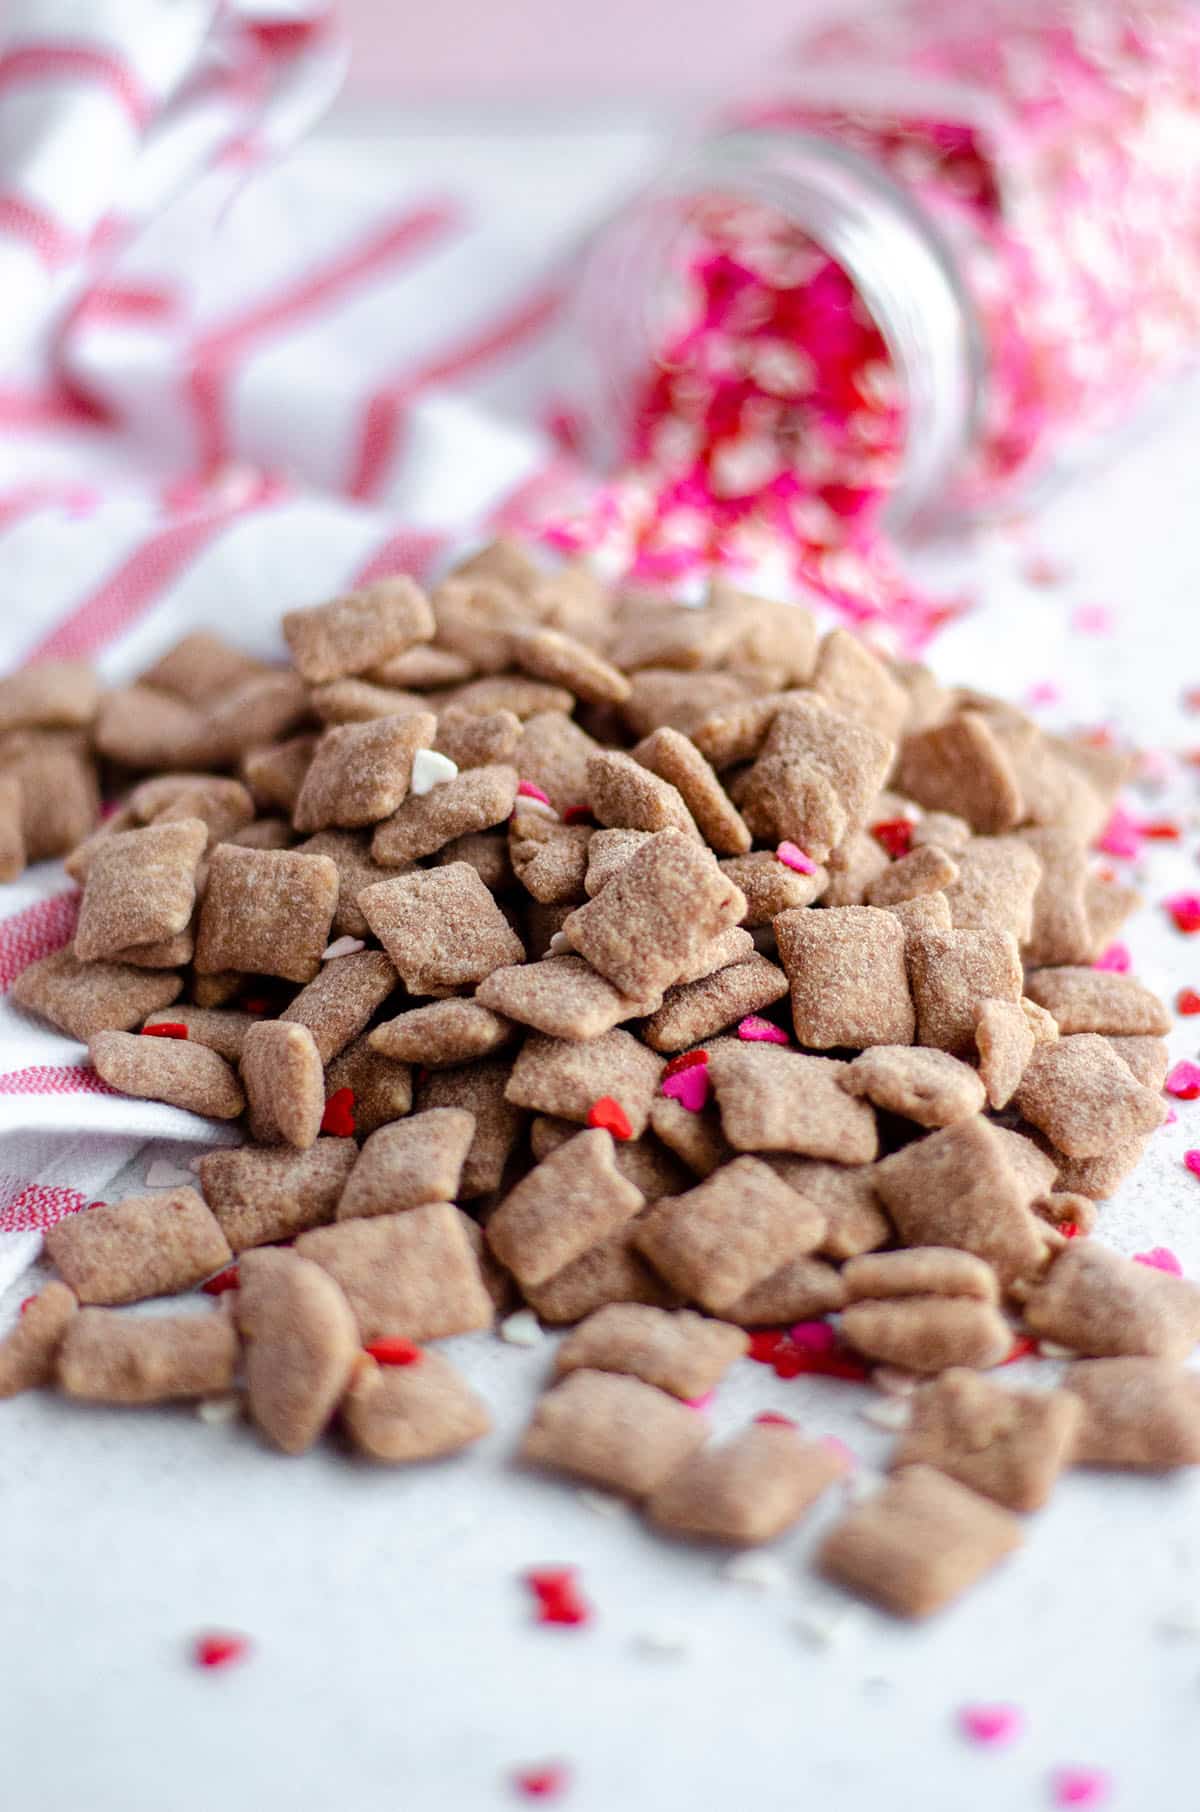 Red Velvet Puppy Chow,How To Make Candles At Home